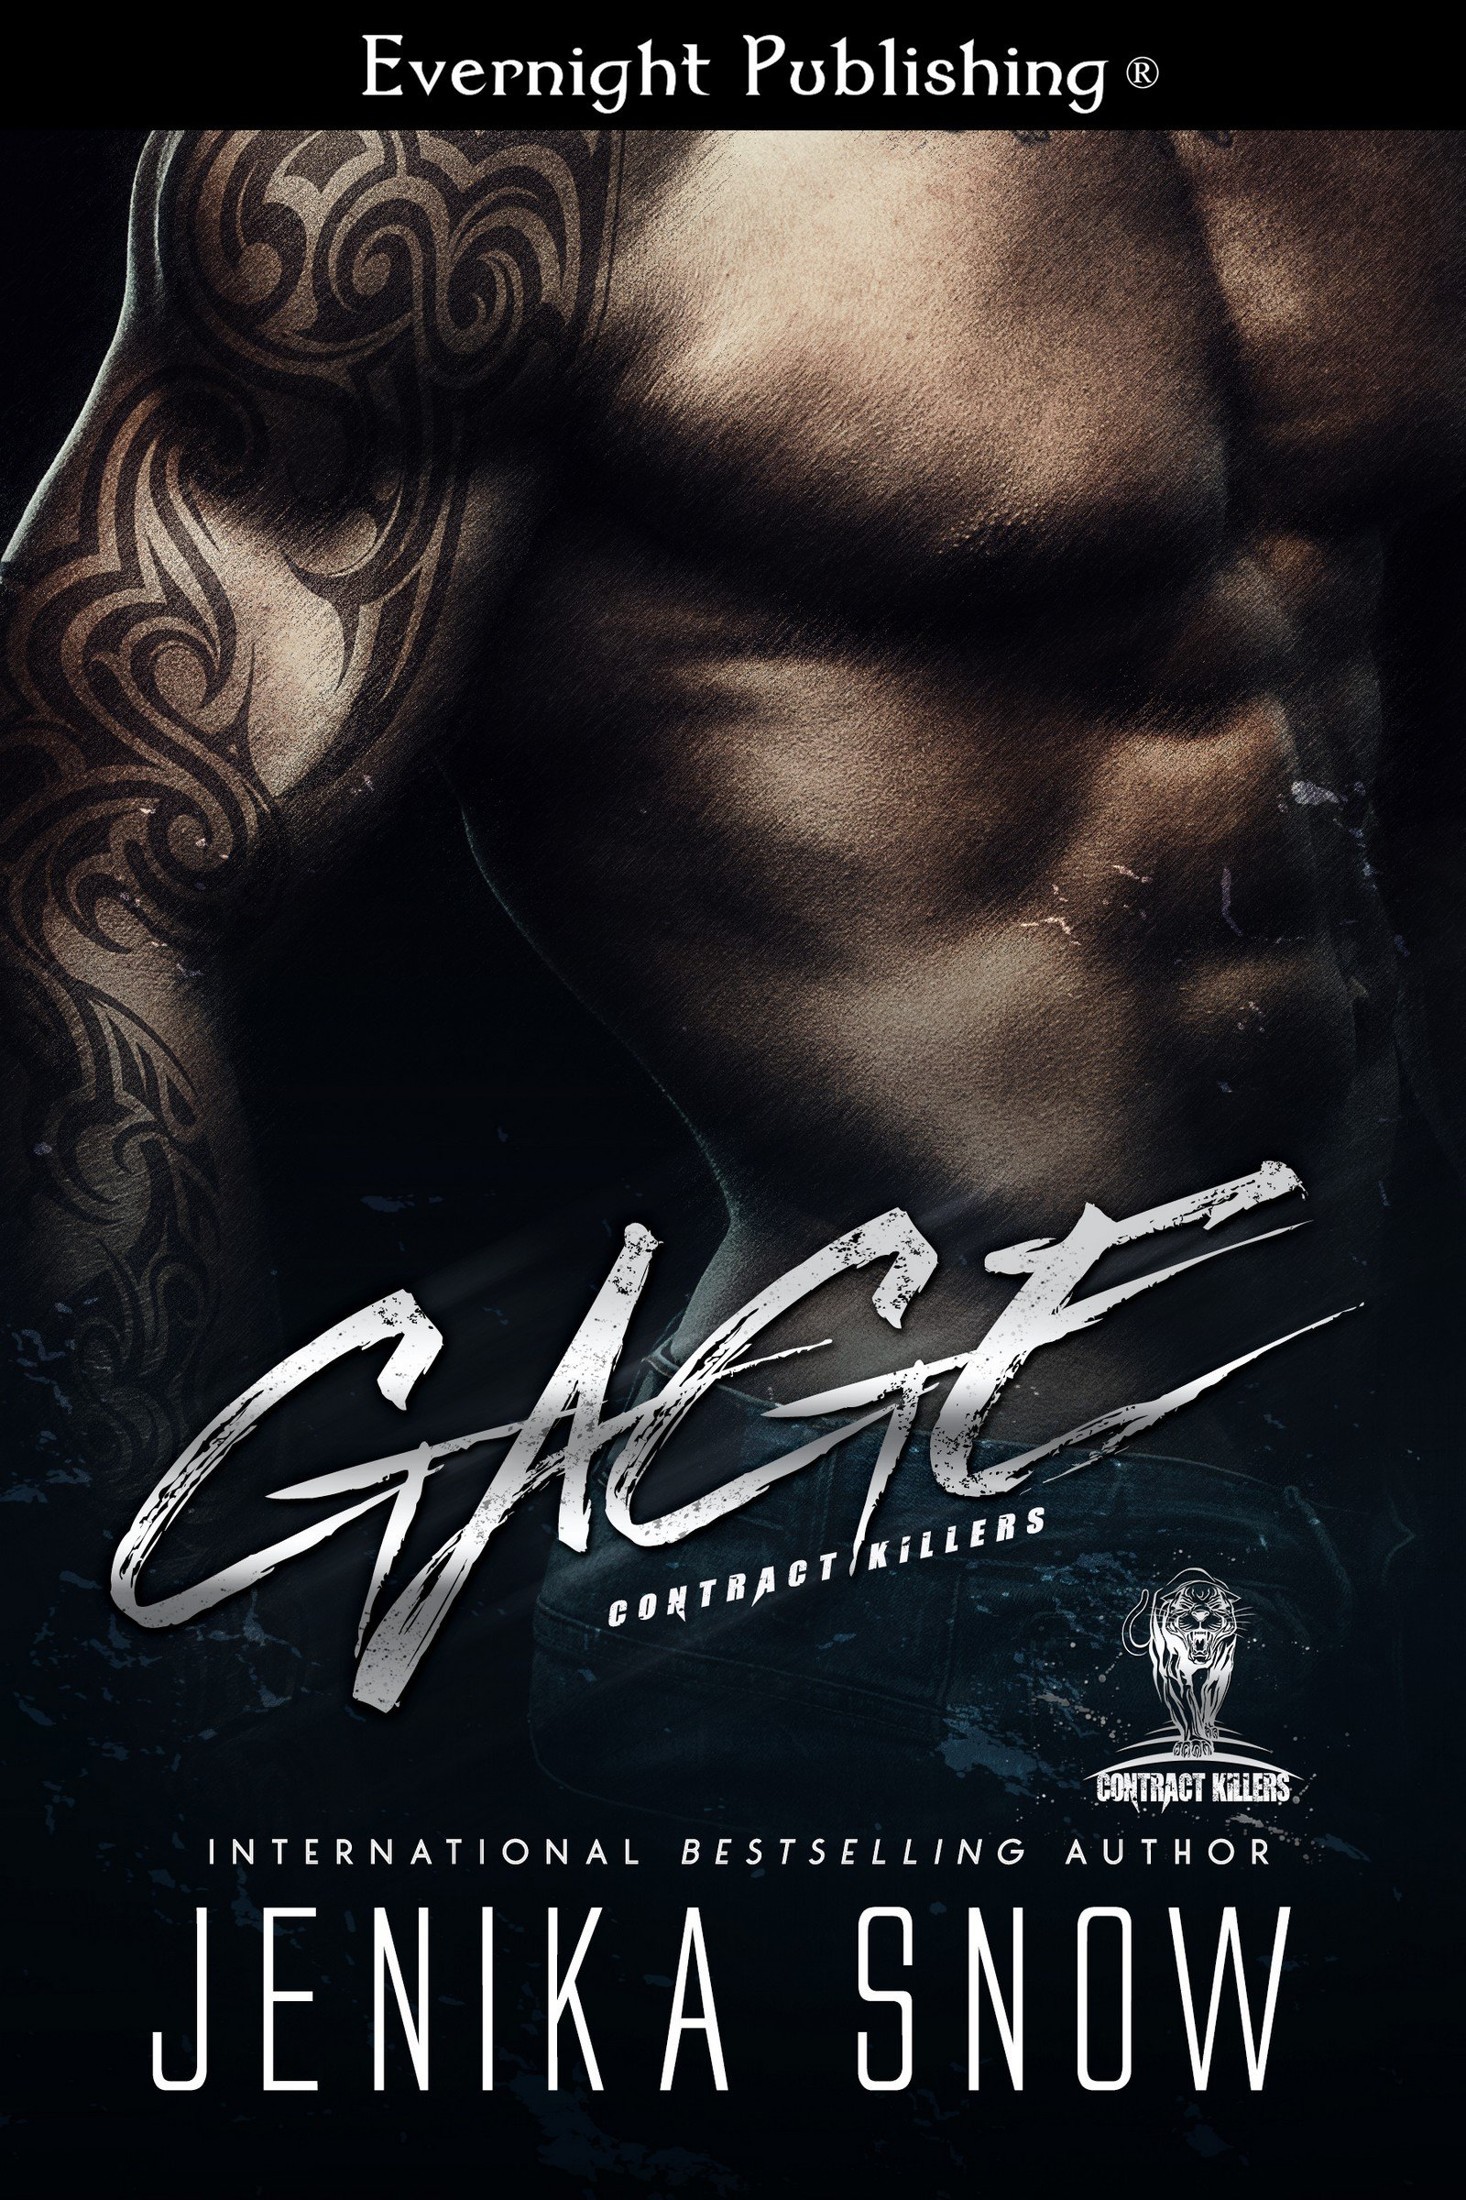 Gage (Contract Killers Book 1) by Jenika Snow